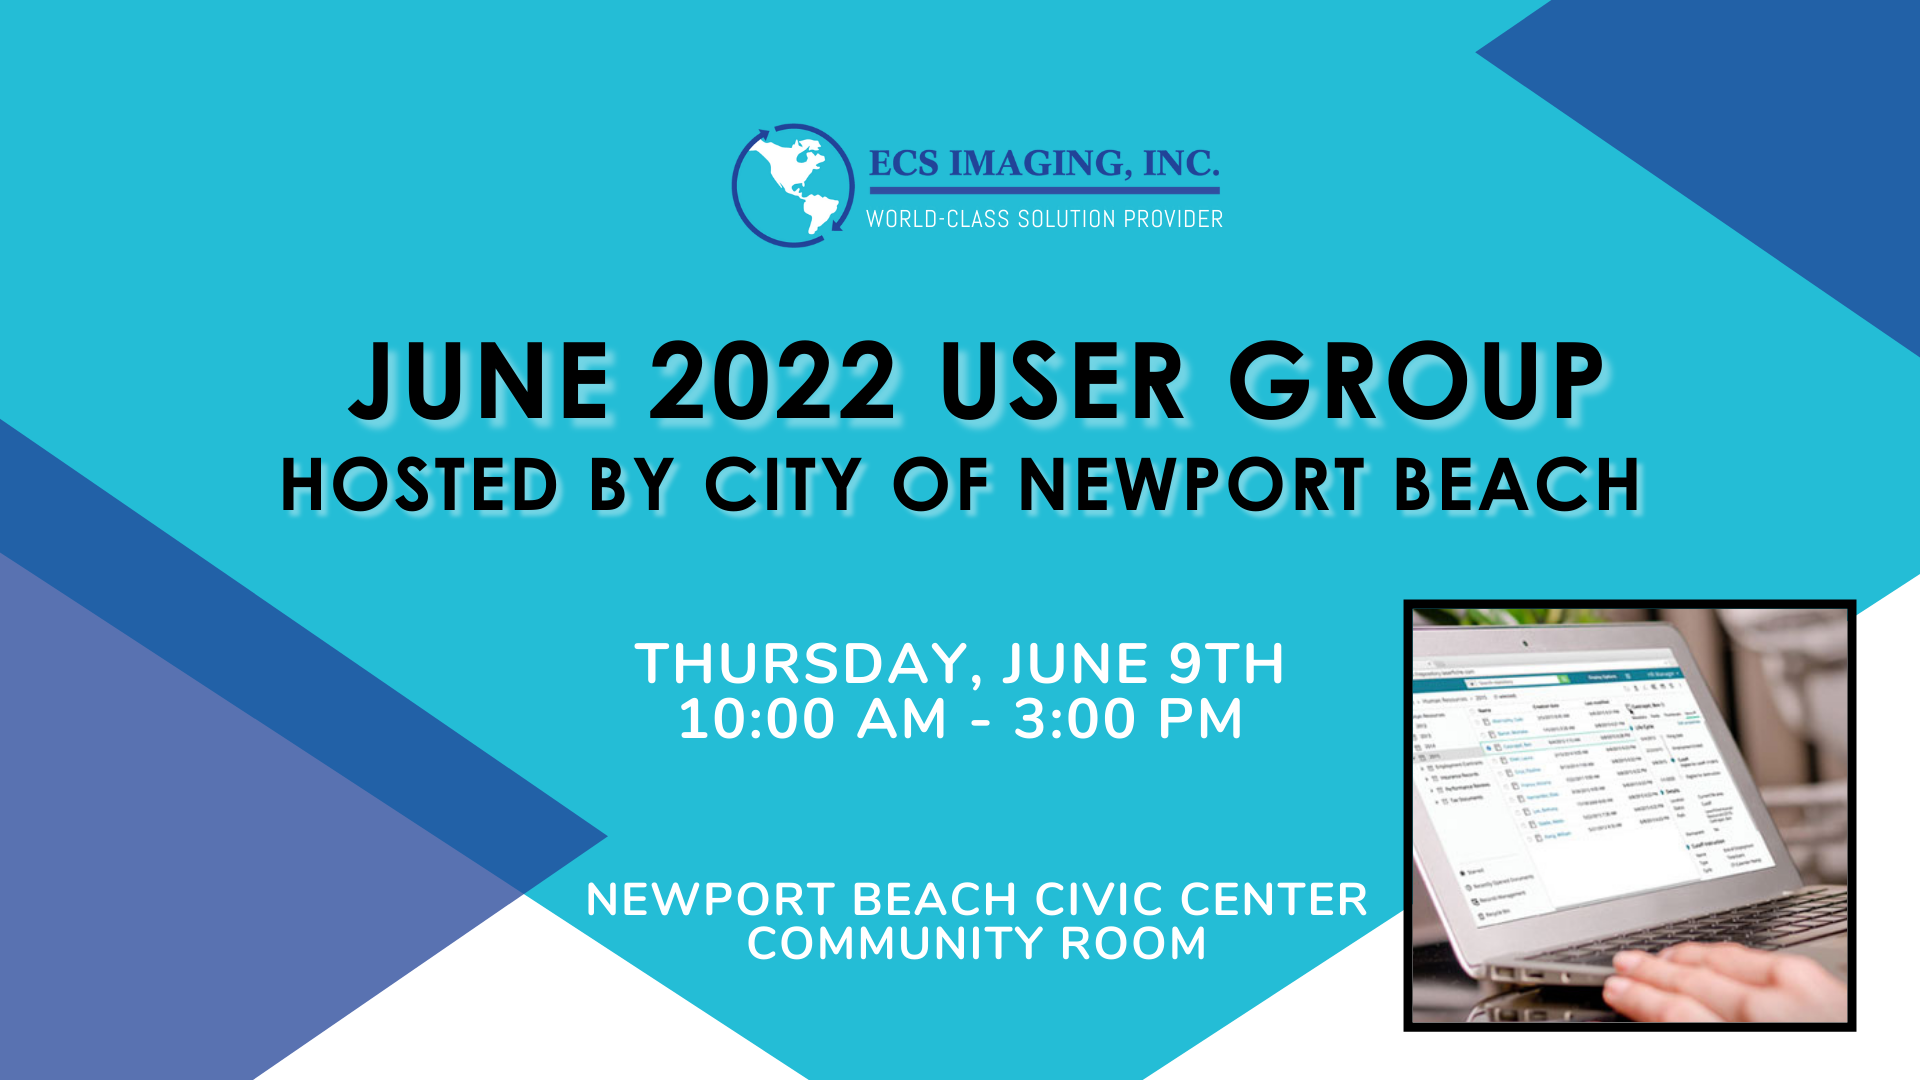 JUNE 2022 USER GROUP HOSTED BY CITY OF NEWPORT BEACH